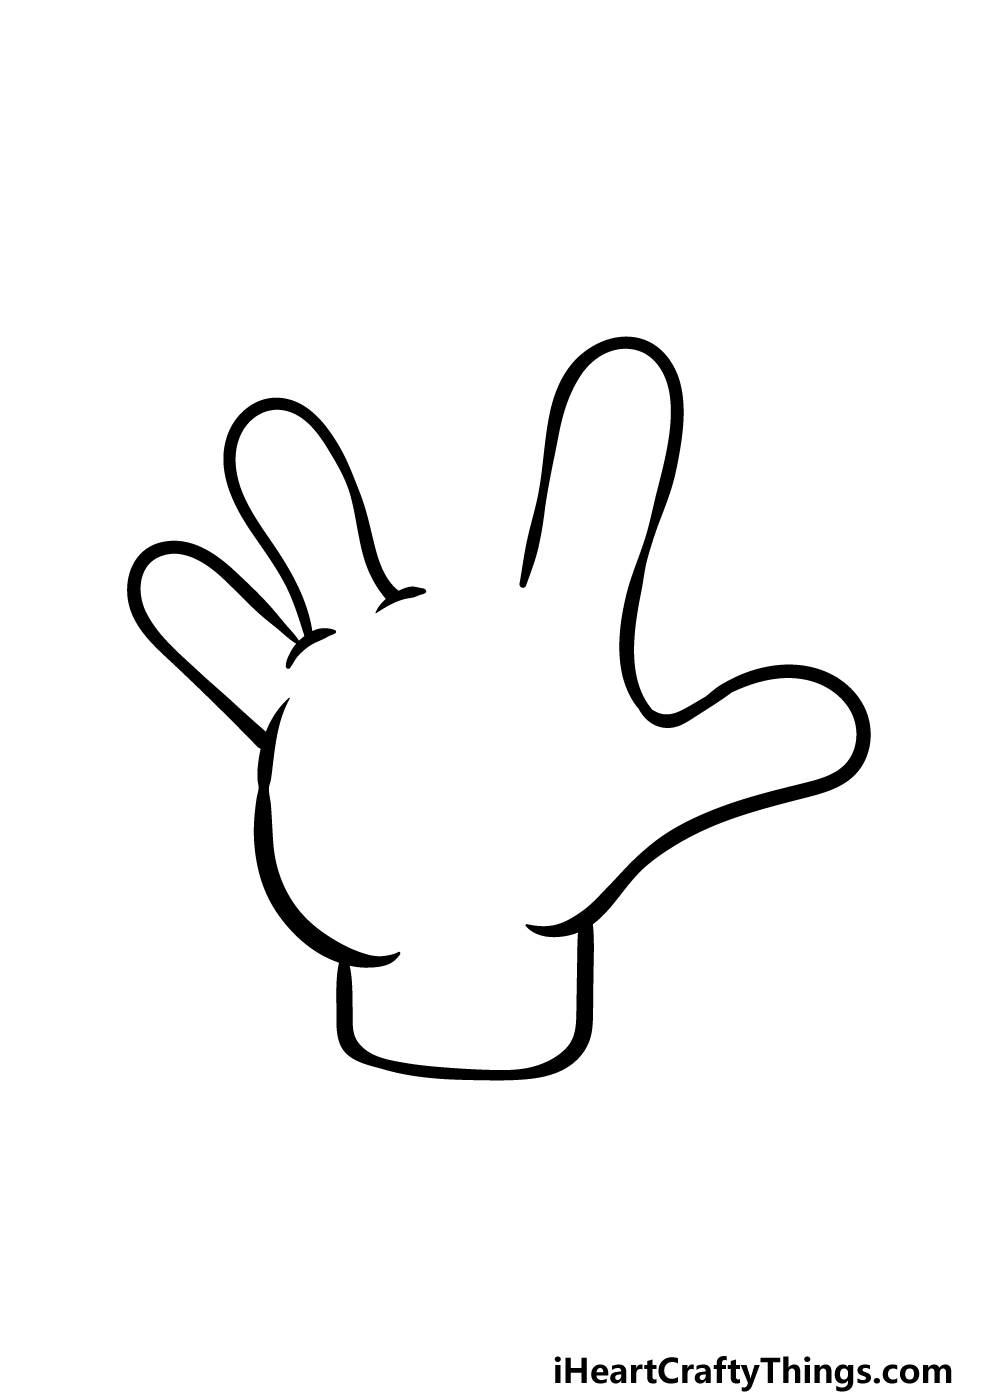 Cartoon Hand Drawing - How To Draw A Cartoon Hand Step By Step